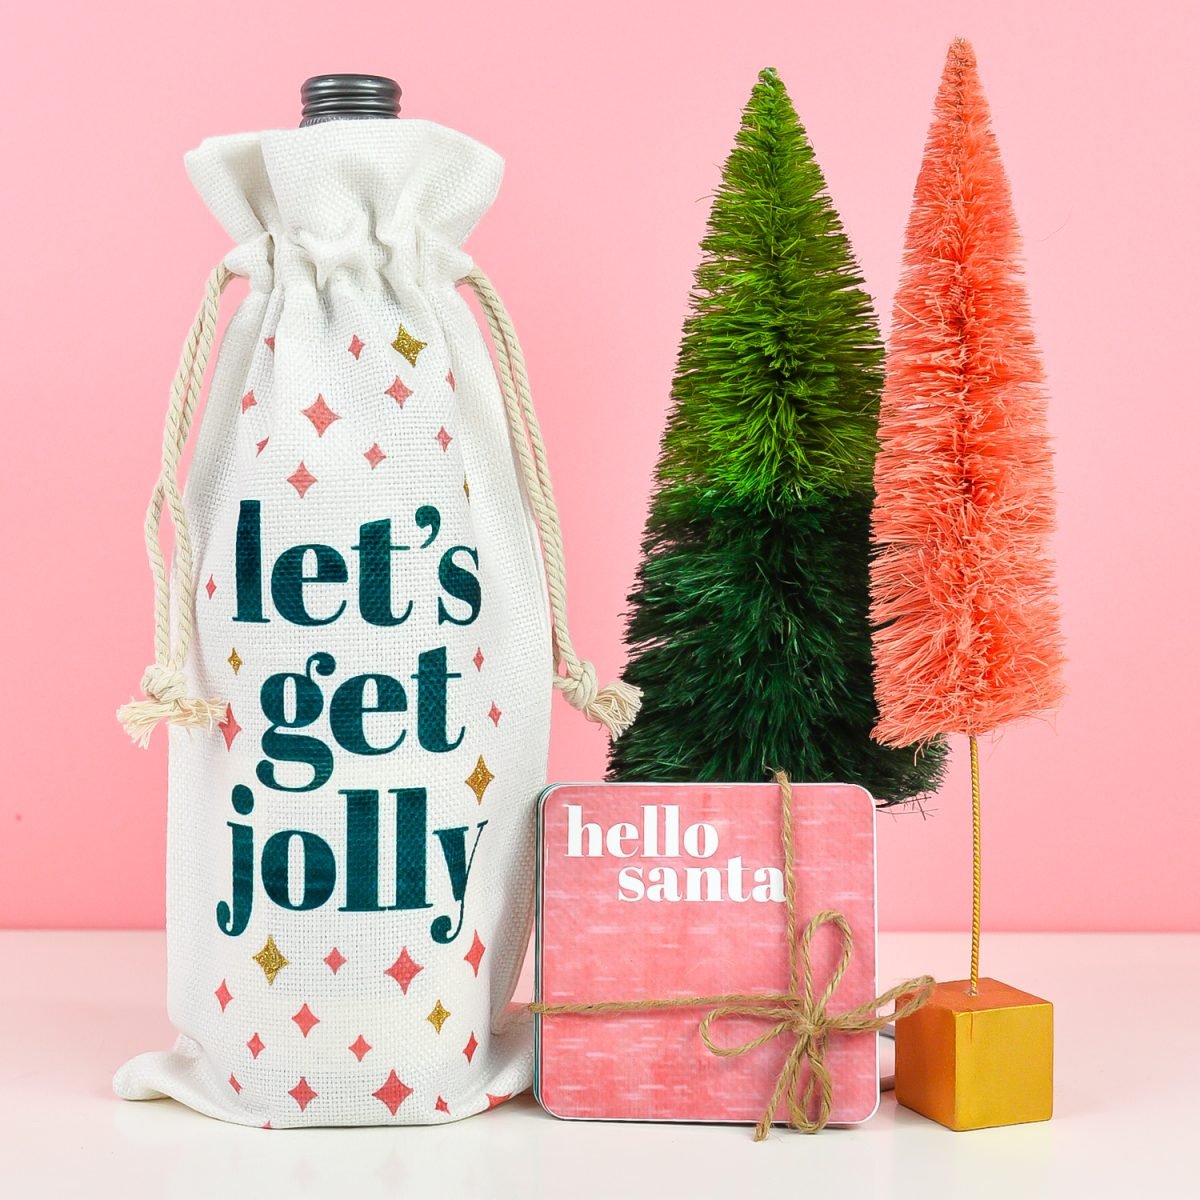 Final wine gifts with "Let's Get Jolly" wine bag and wine coasters.